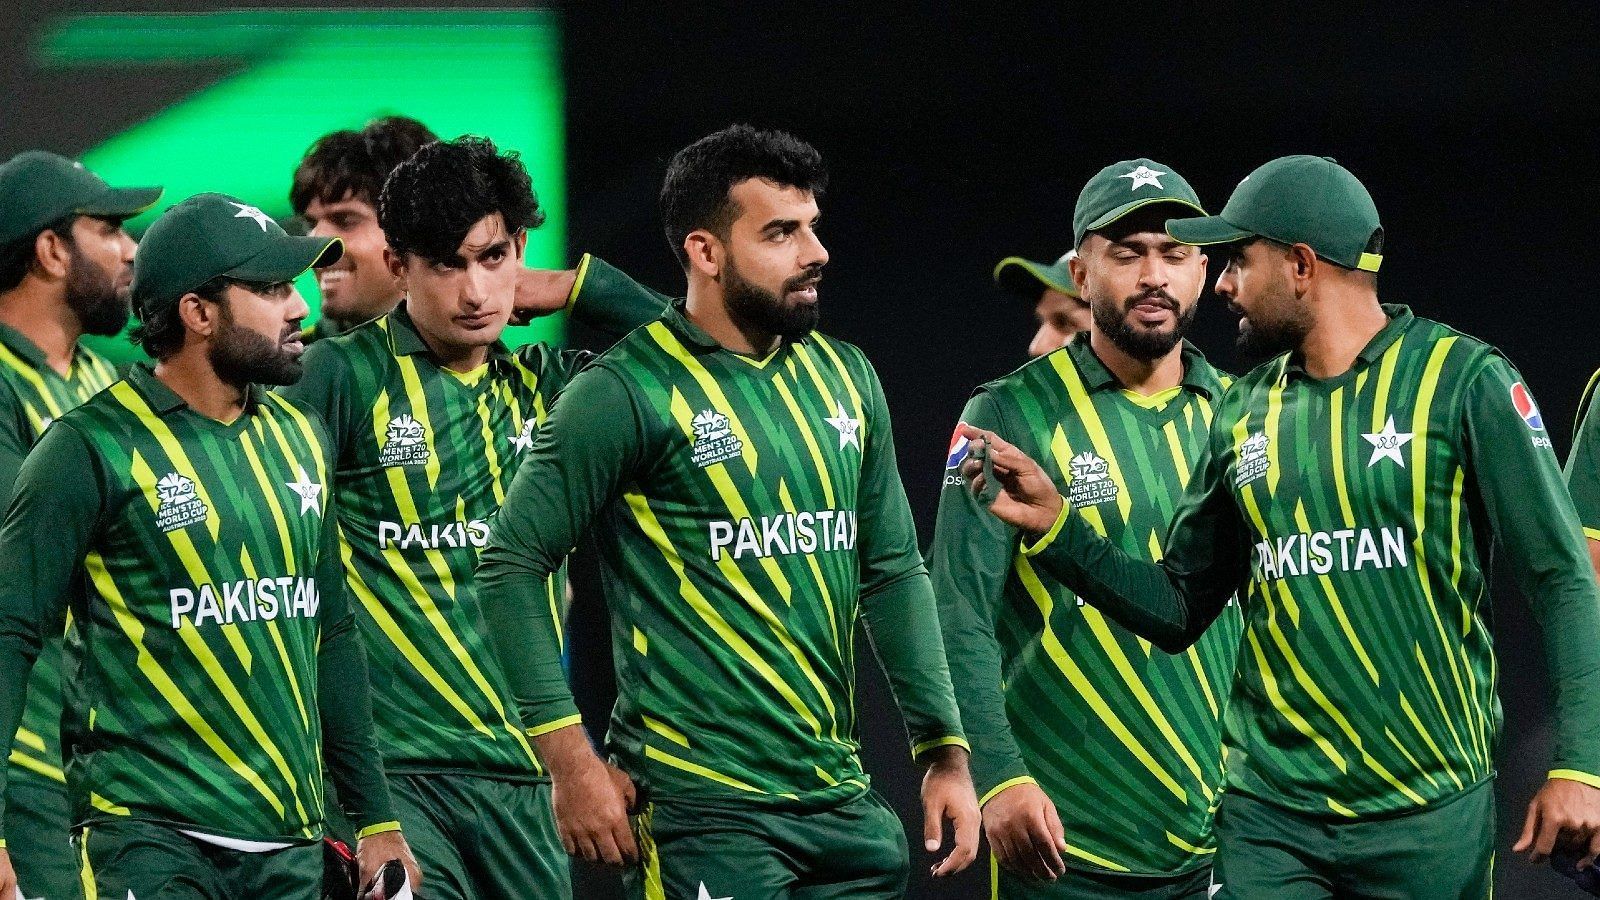 Can Pakistan register a resounding win to keep their semi-final hopes alive?